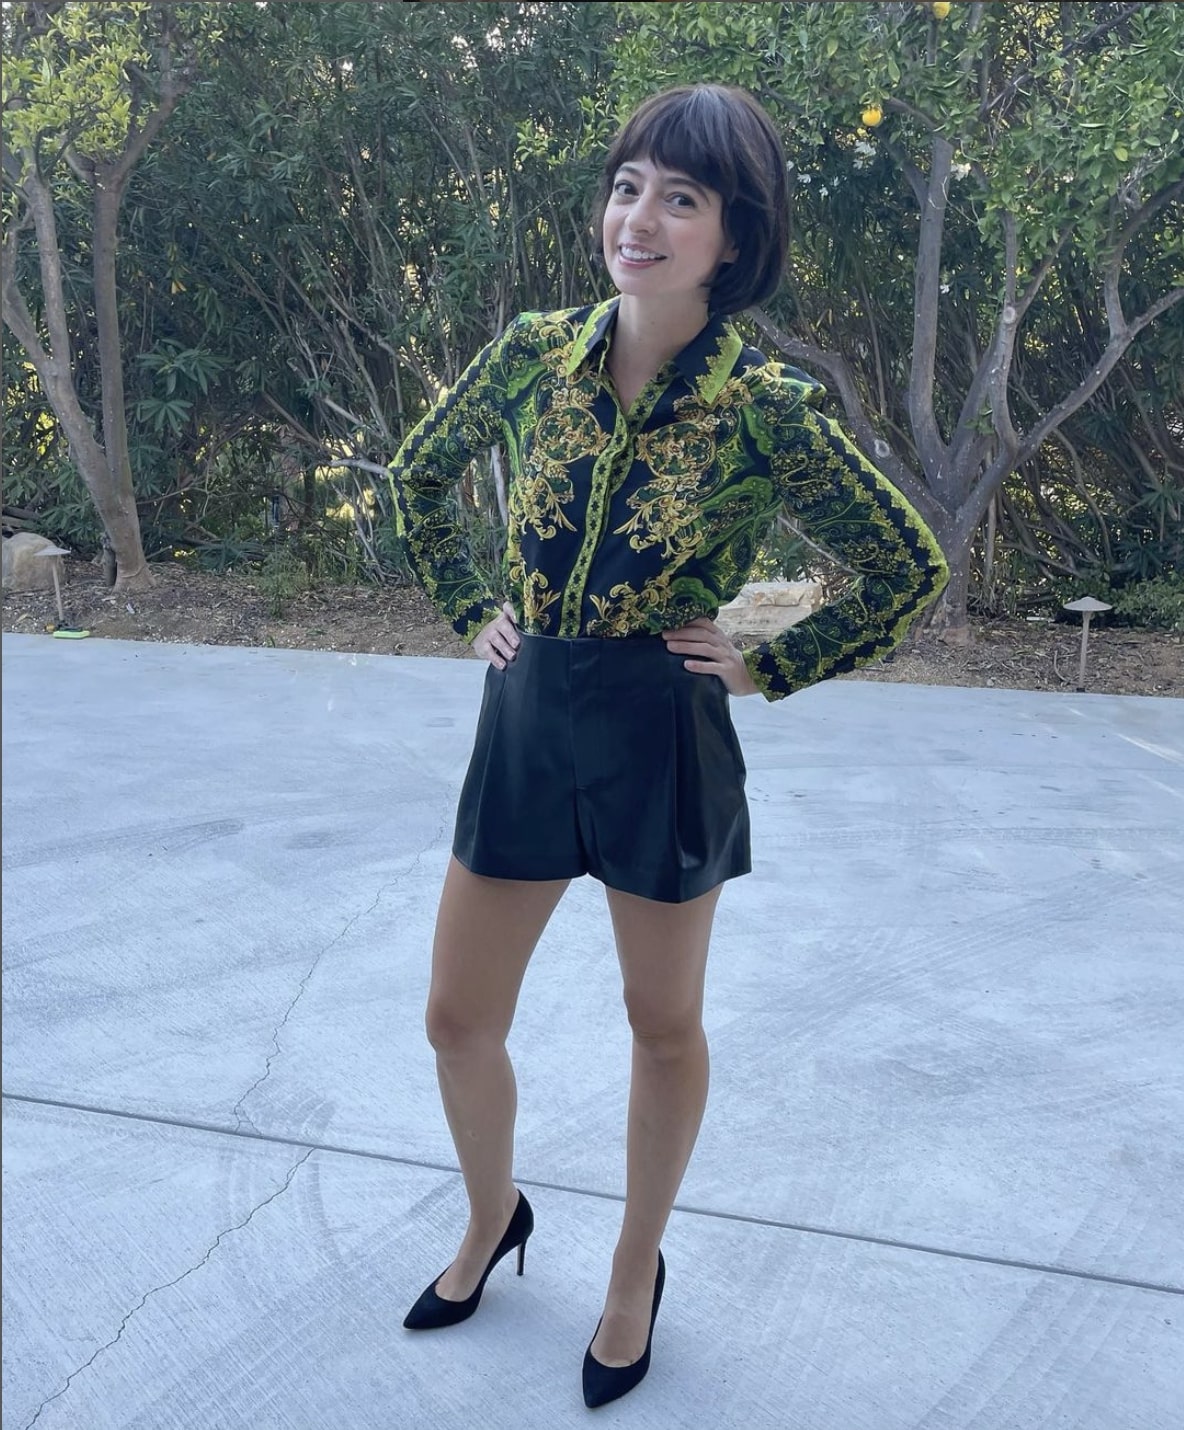 big-bang-theory-star-kate-micucci-has-lung-cancer-even-though-she-never-smoked-a-cigarette